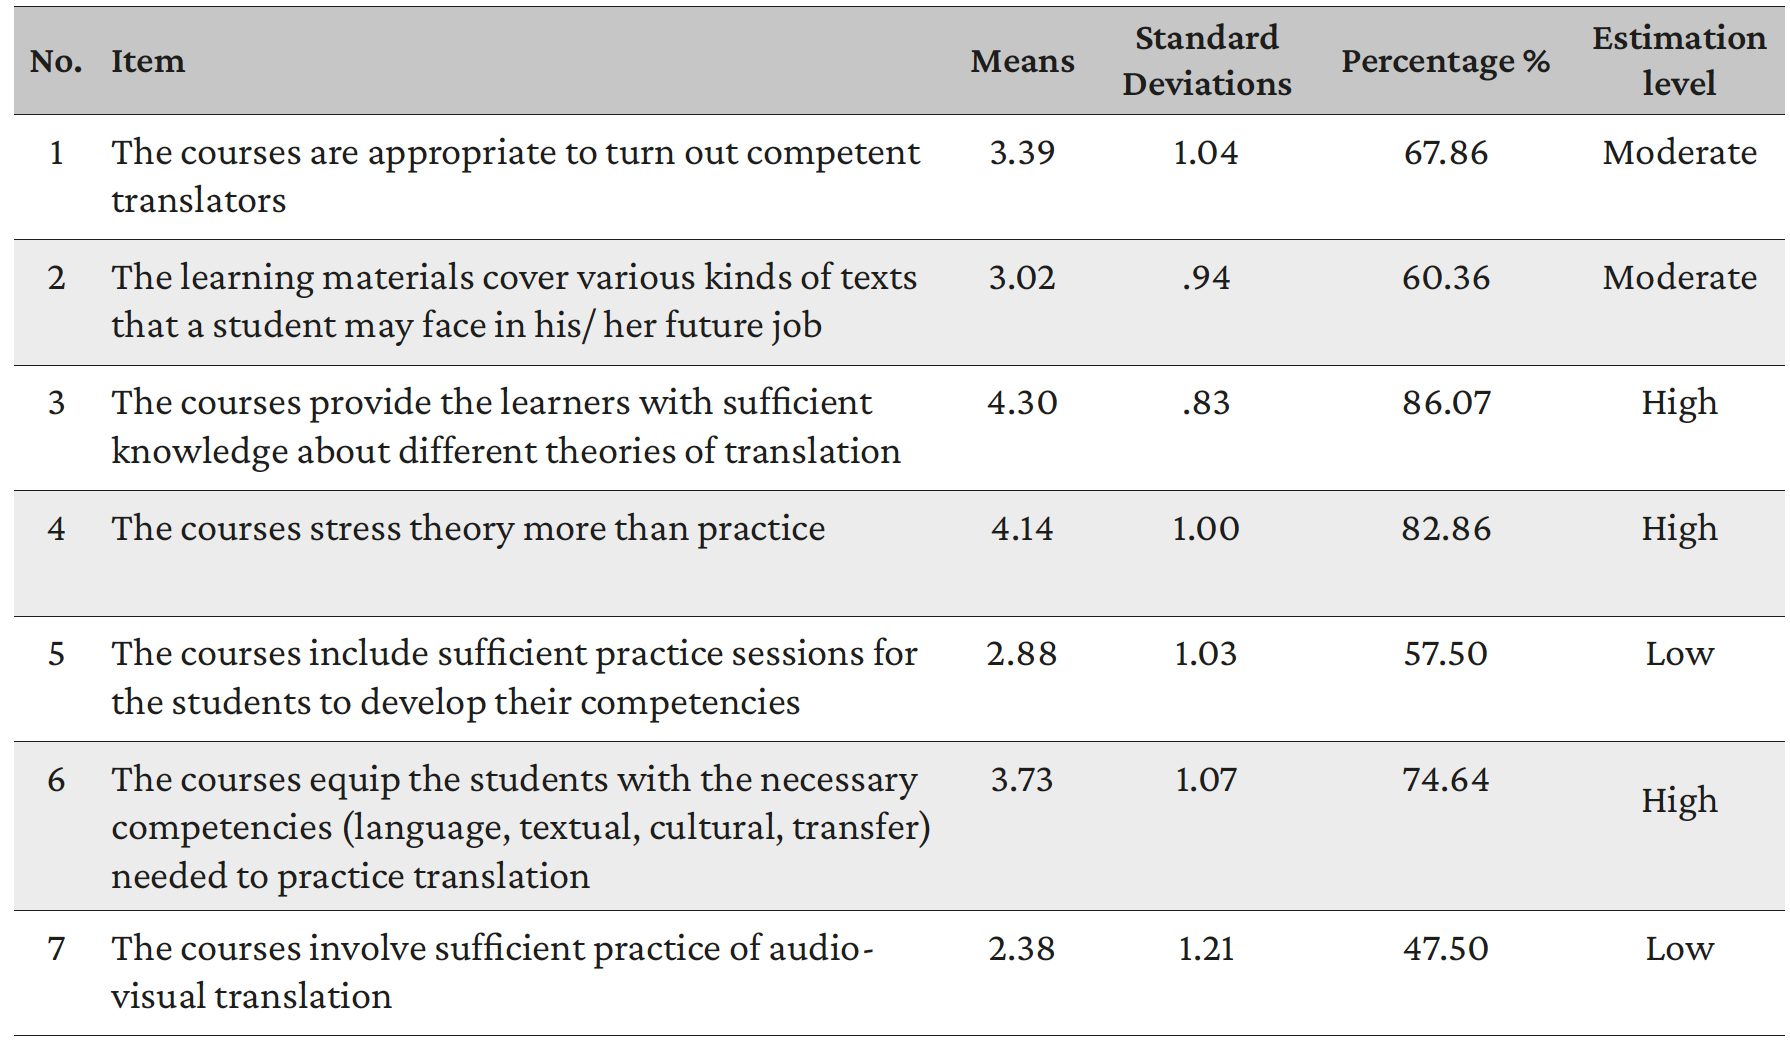 Table 5. Students’ perceptions of the learning material included in the courses